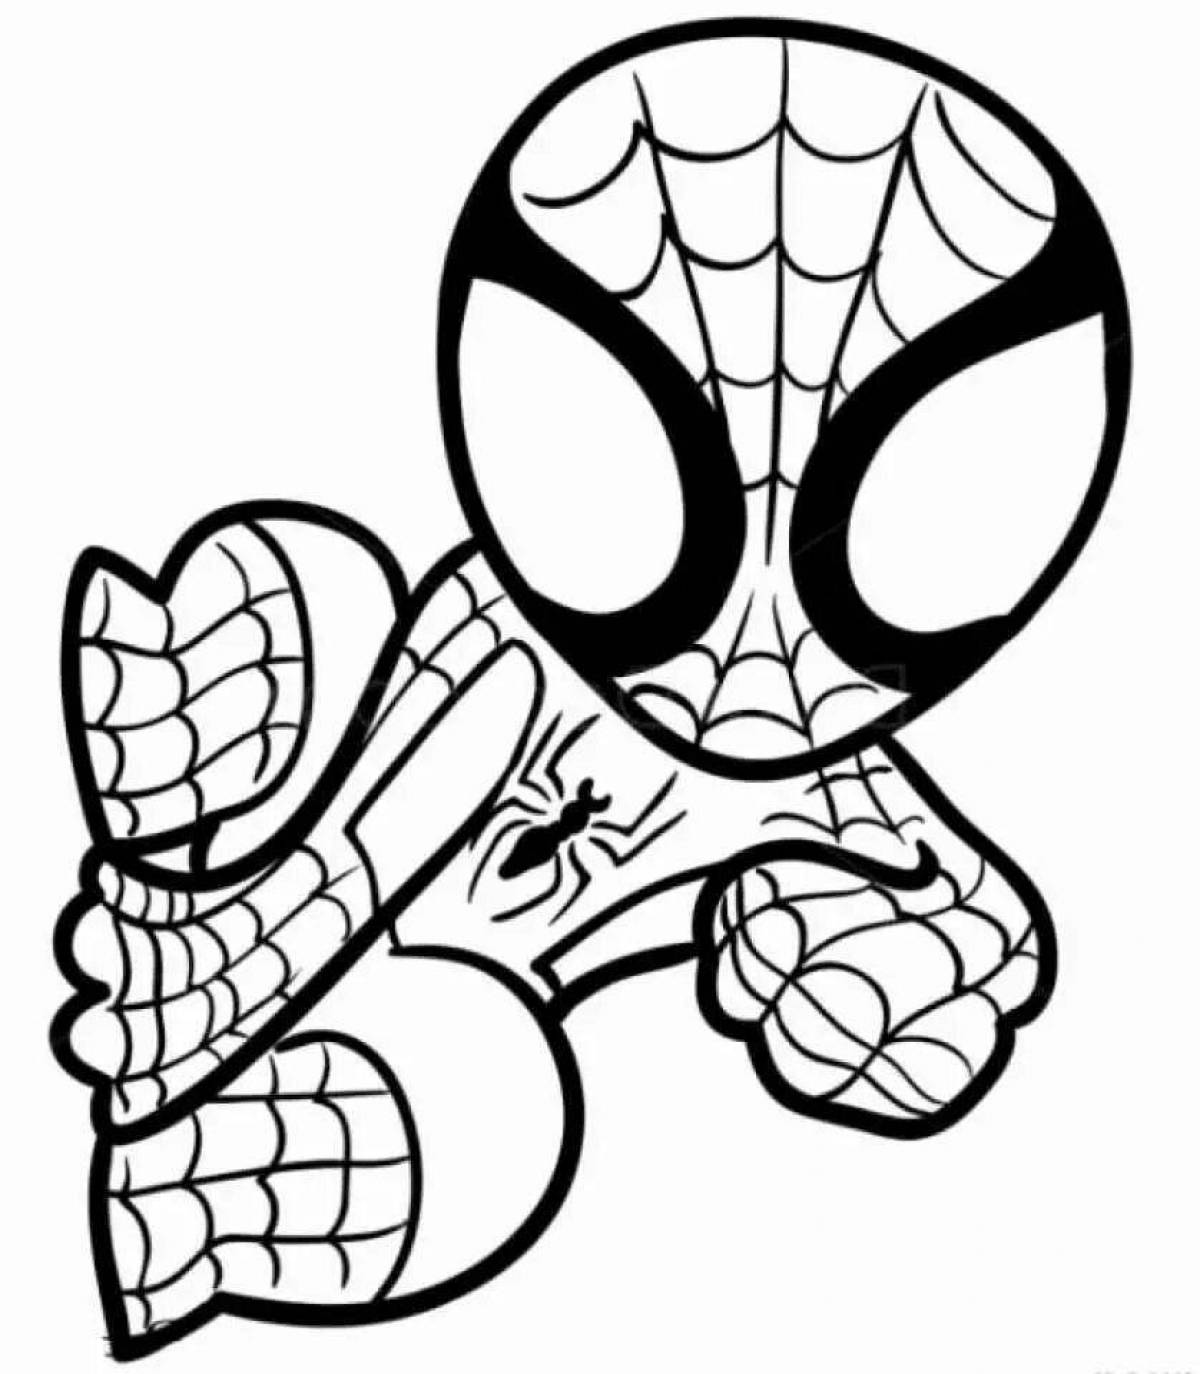 Small spider-man with athletic body